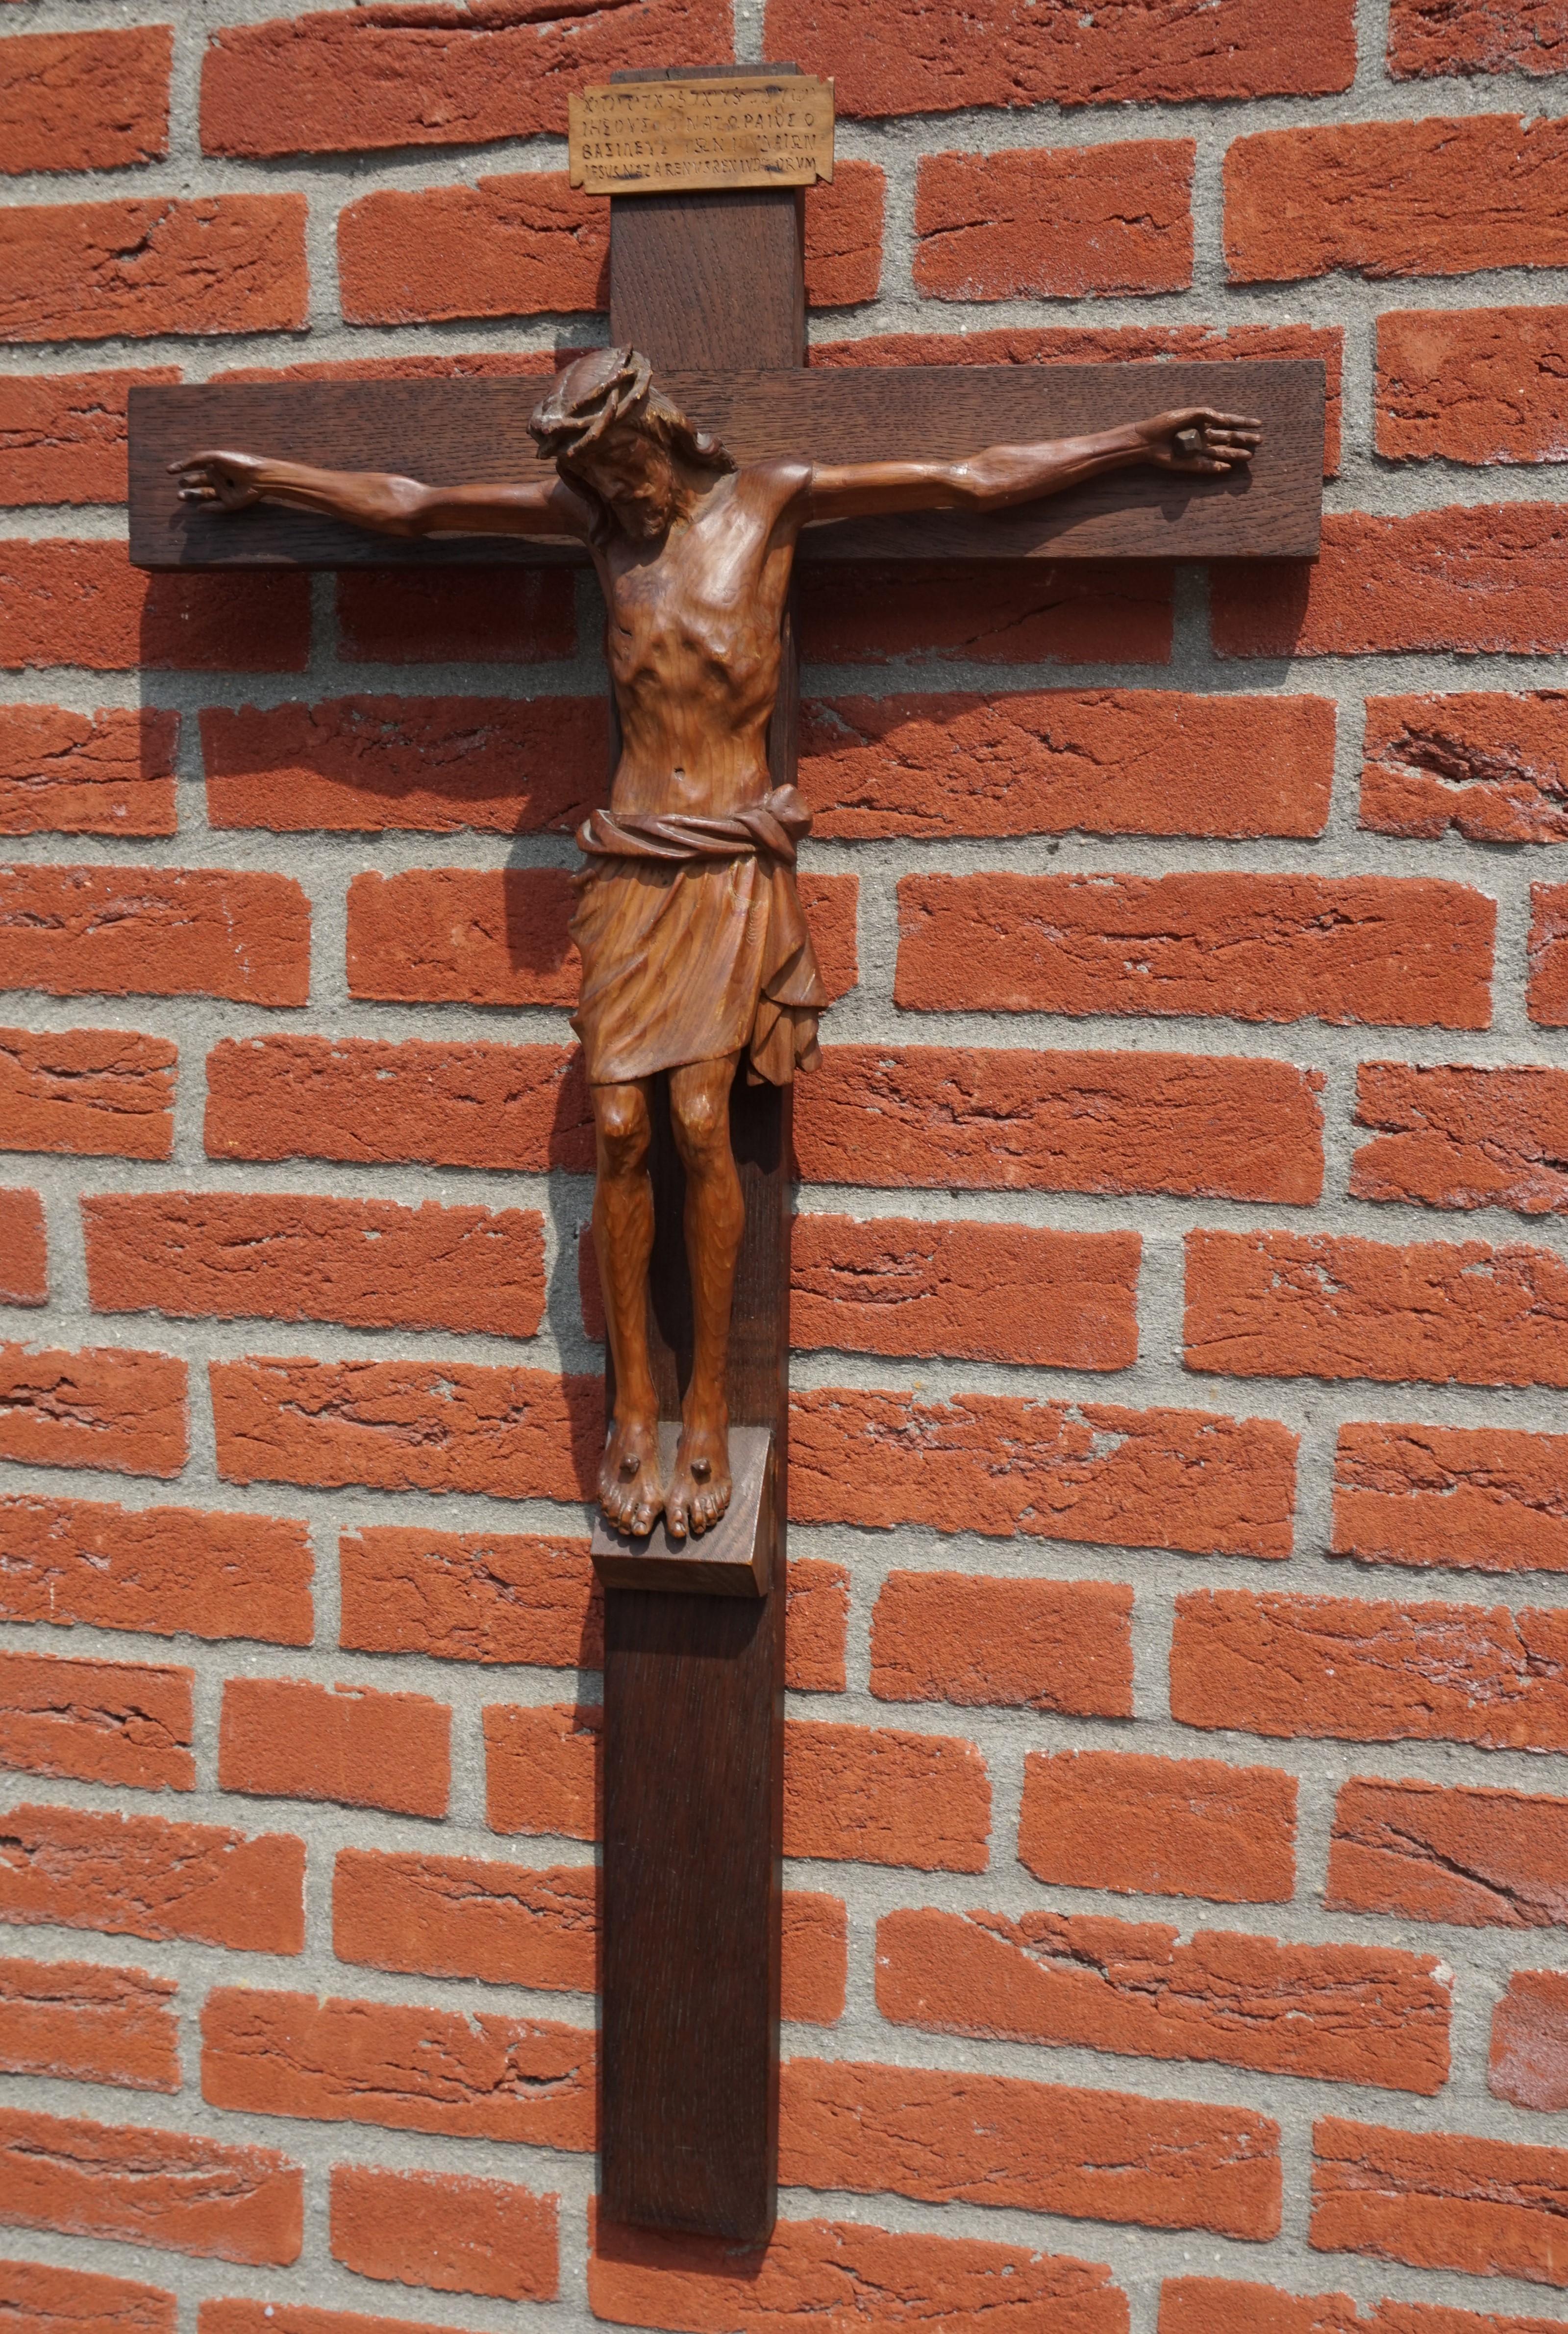 Large size and good quality carved crucifix with 'Jezus Nazarenus, Rex Judaeorum' text in 4 languages.

In the course of the past twelve months we have offered and sold a number of top-quality crafted church relics that were part of an extensive